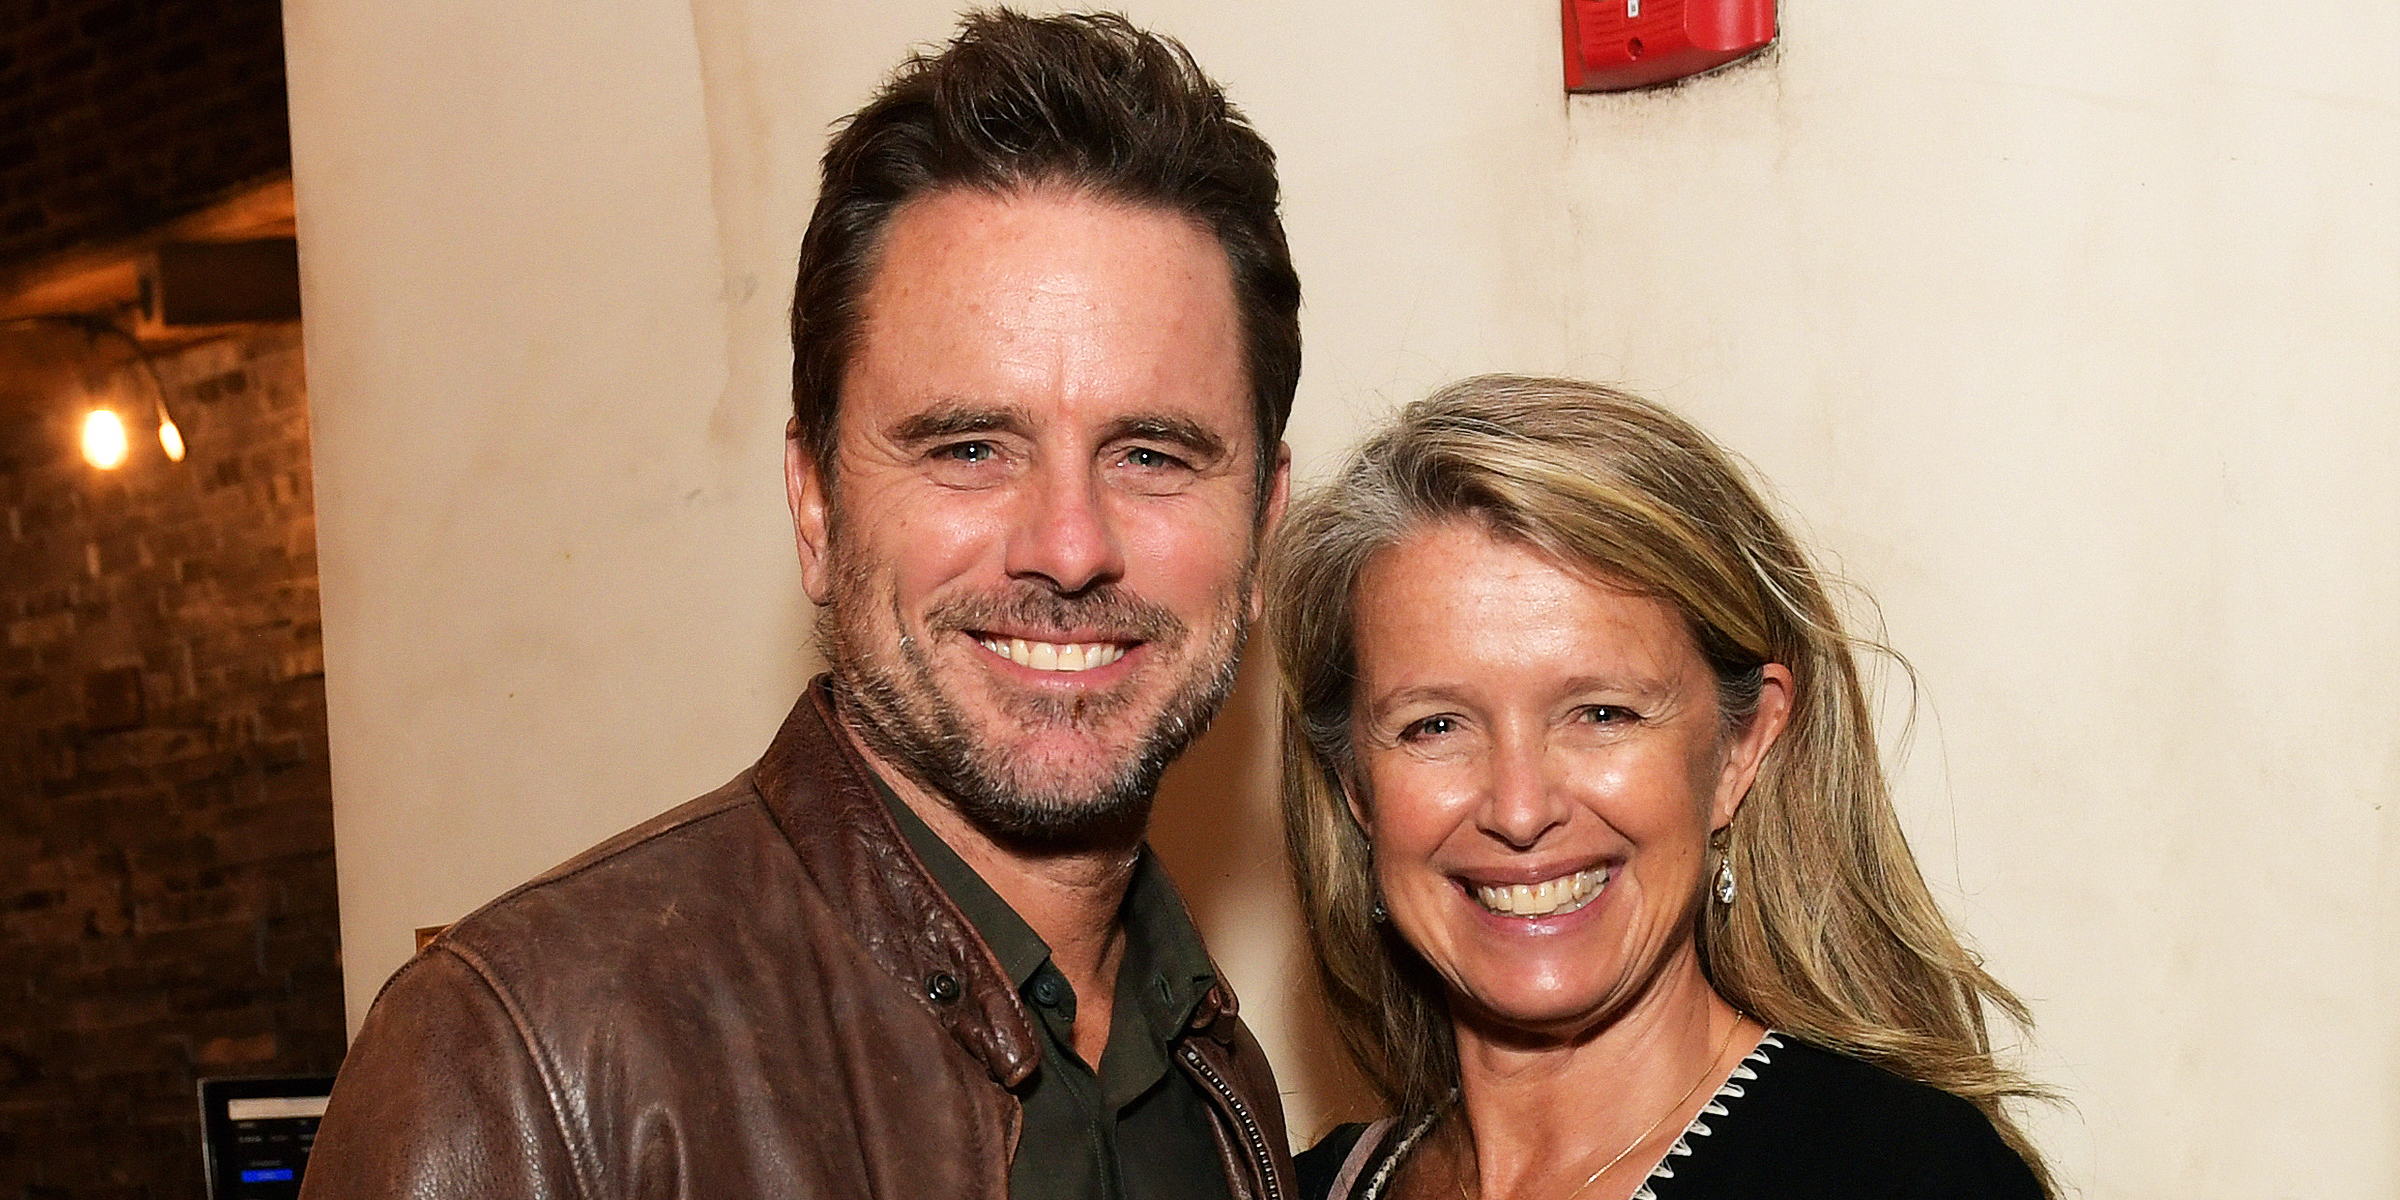 Patty Hanson and Charles Esten | Source: Getty Images